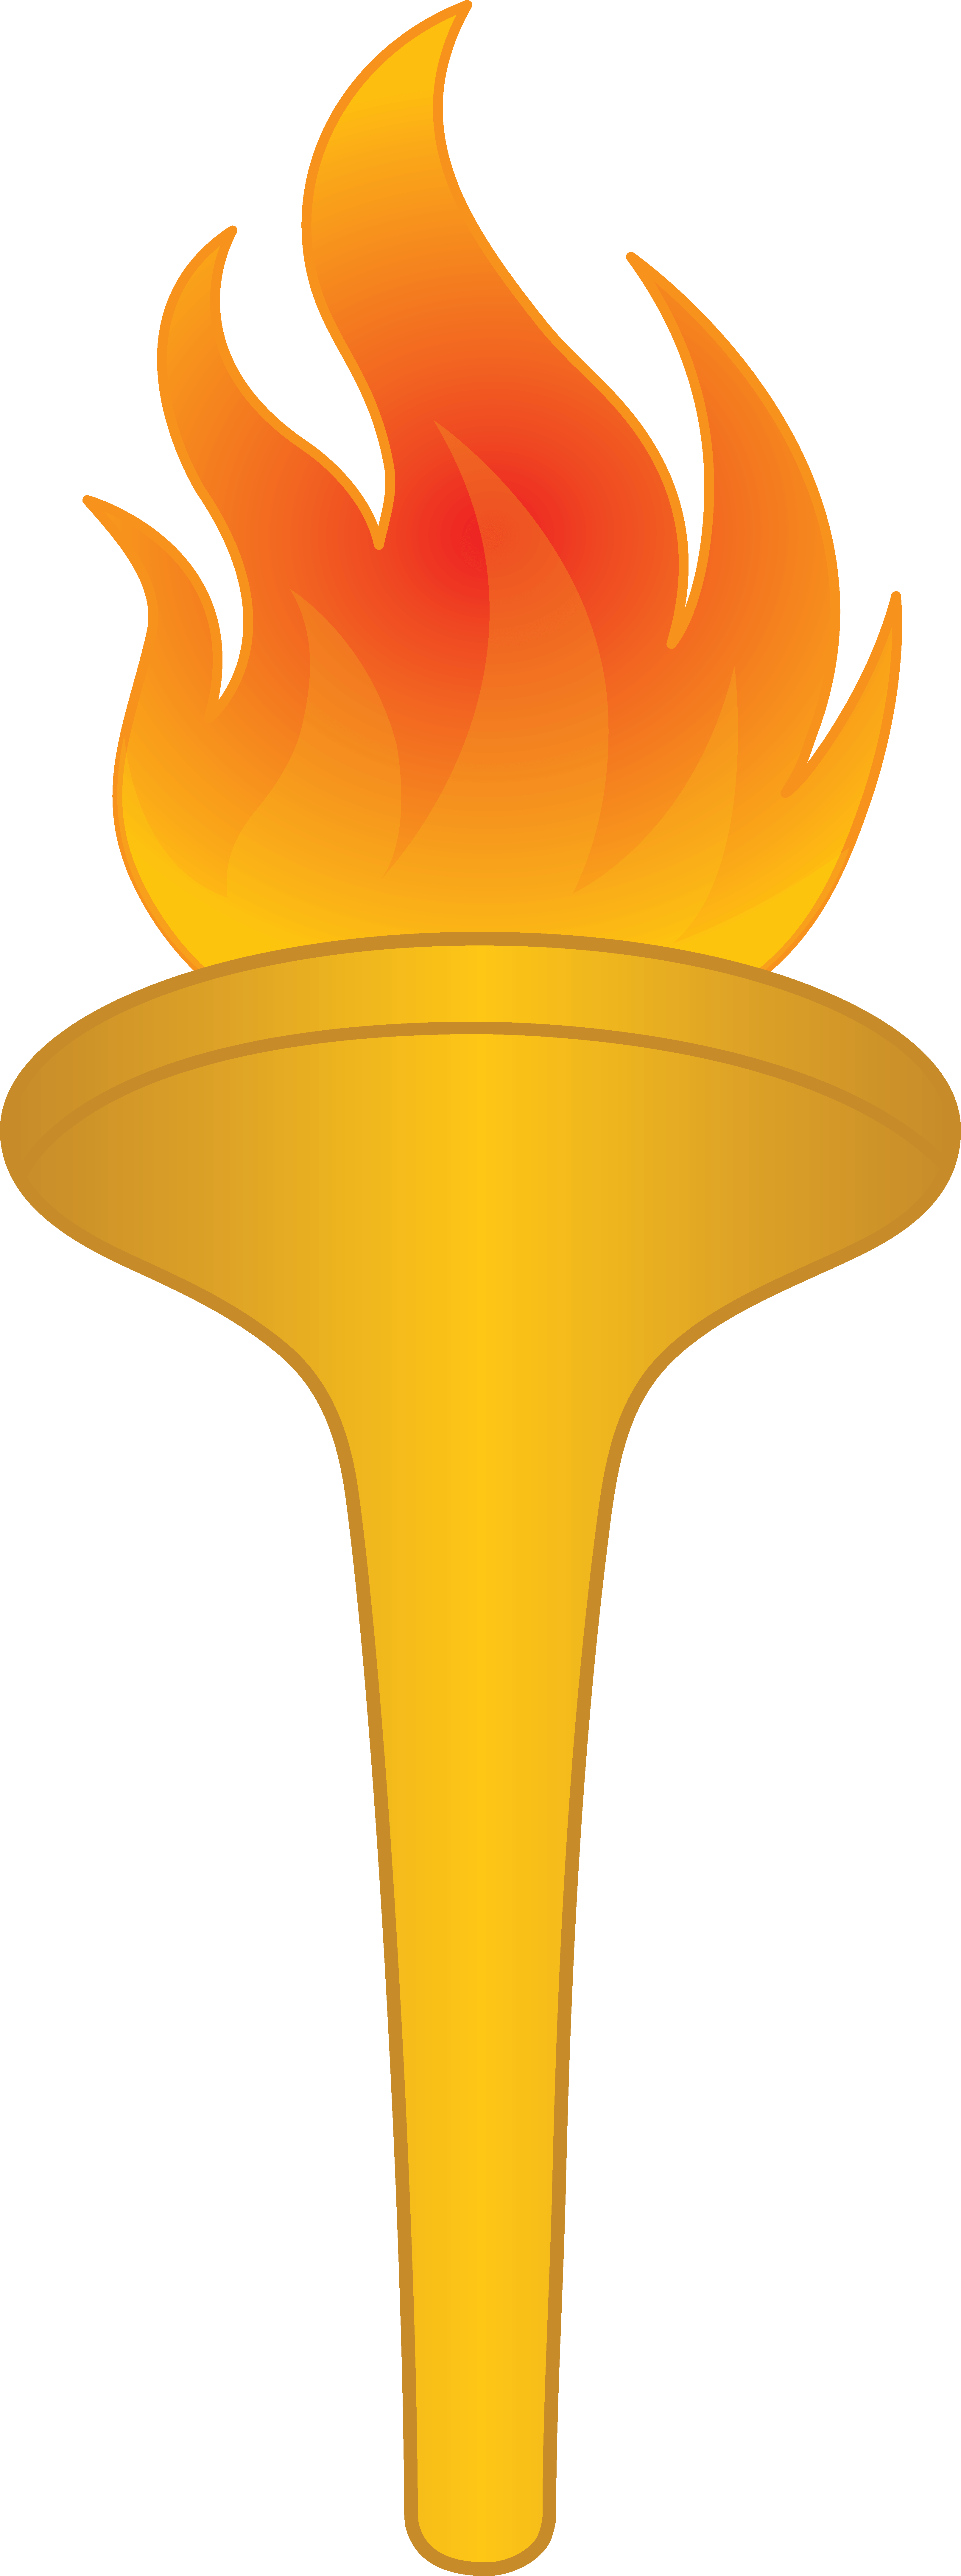 Animated torch cliparts.